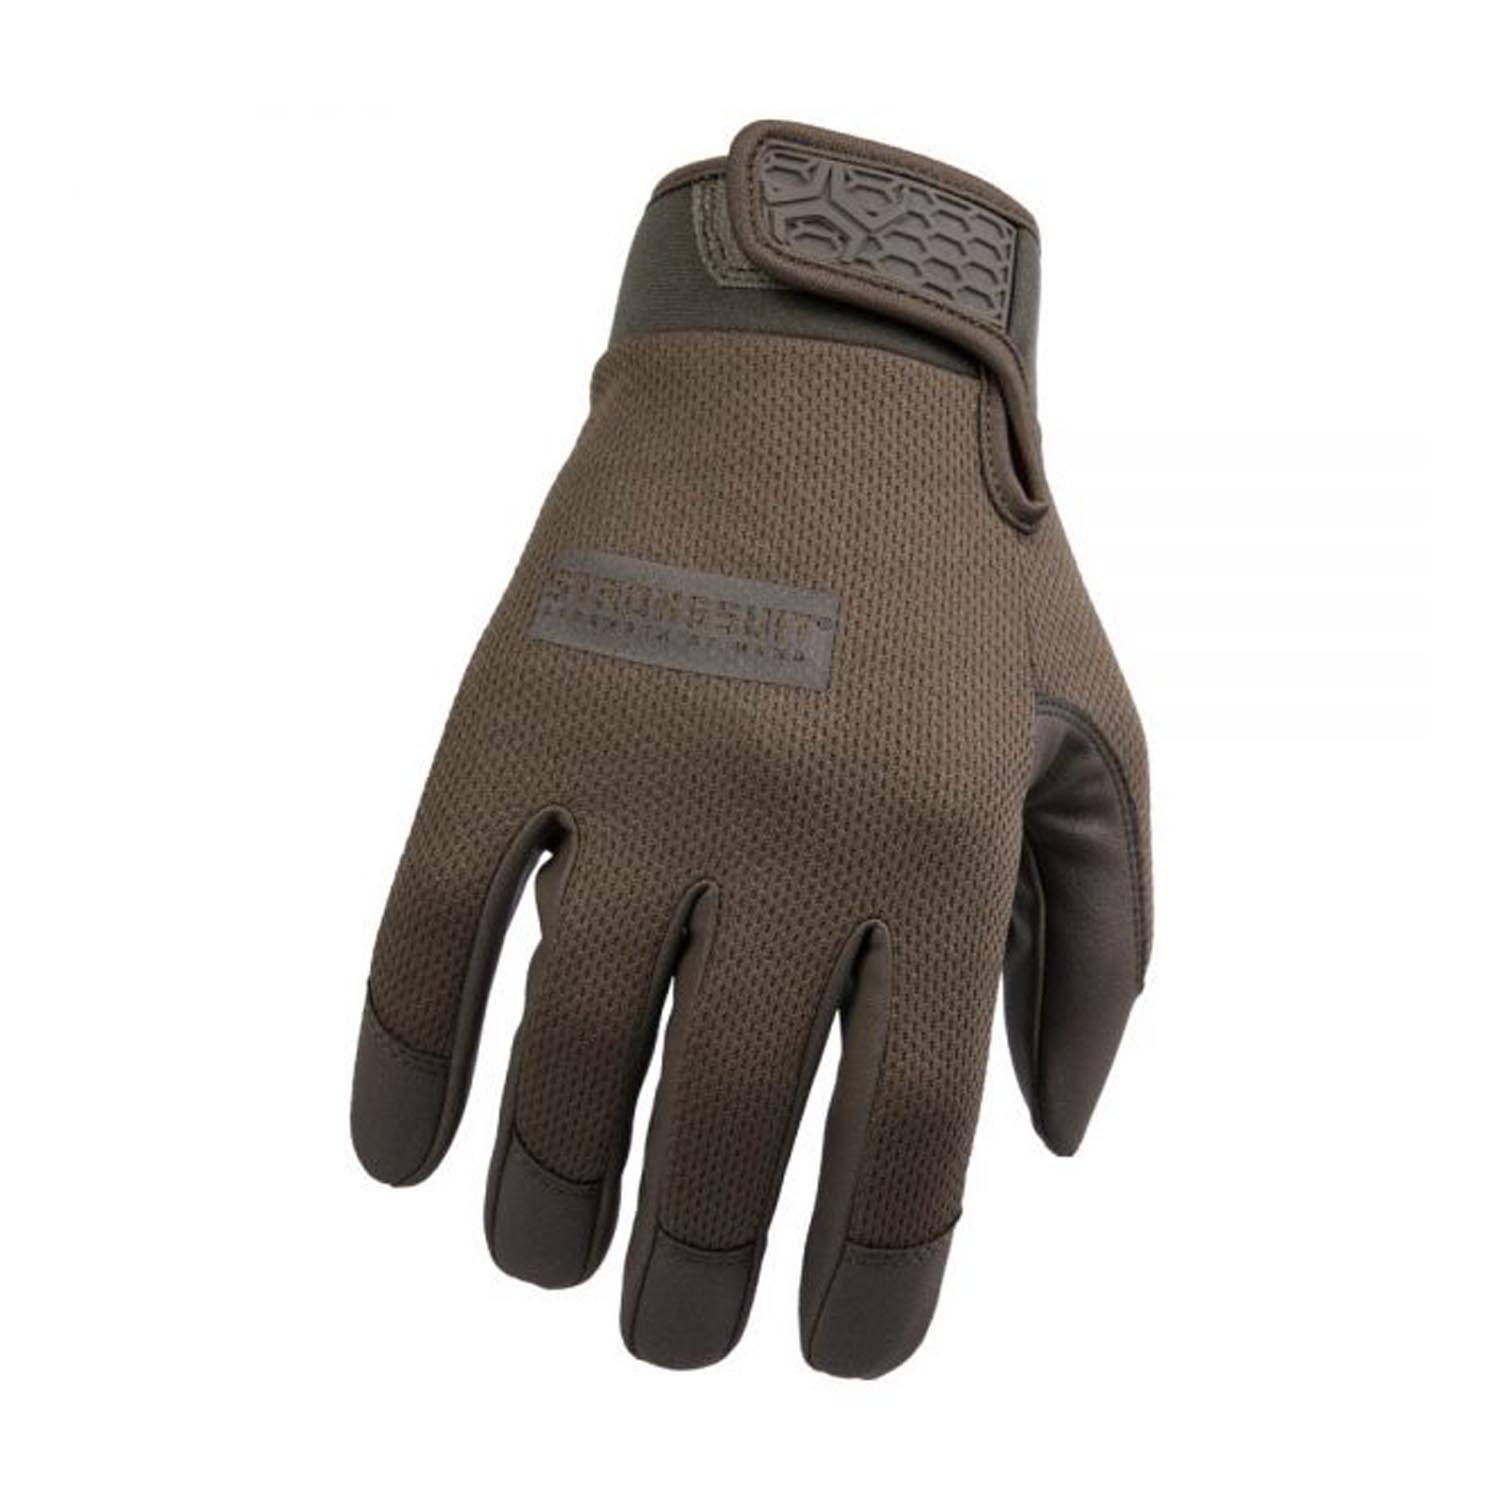 STRONGSUIT SECOND SKIN TACTICAL GLOVE